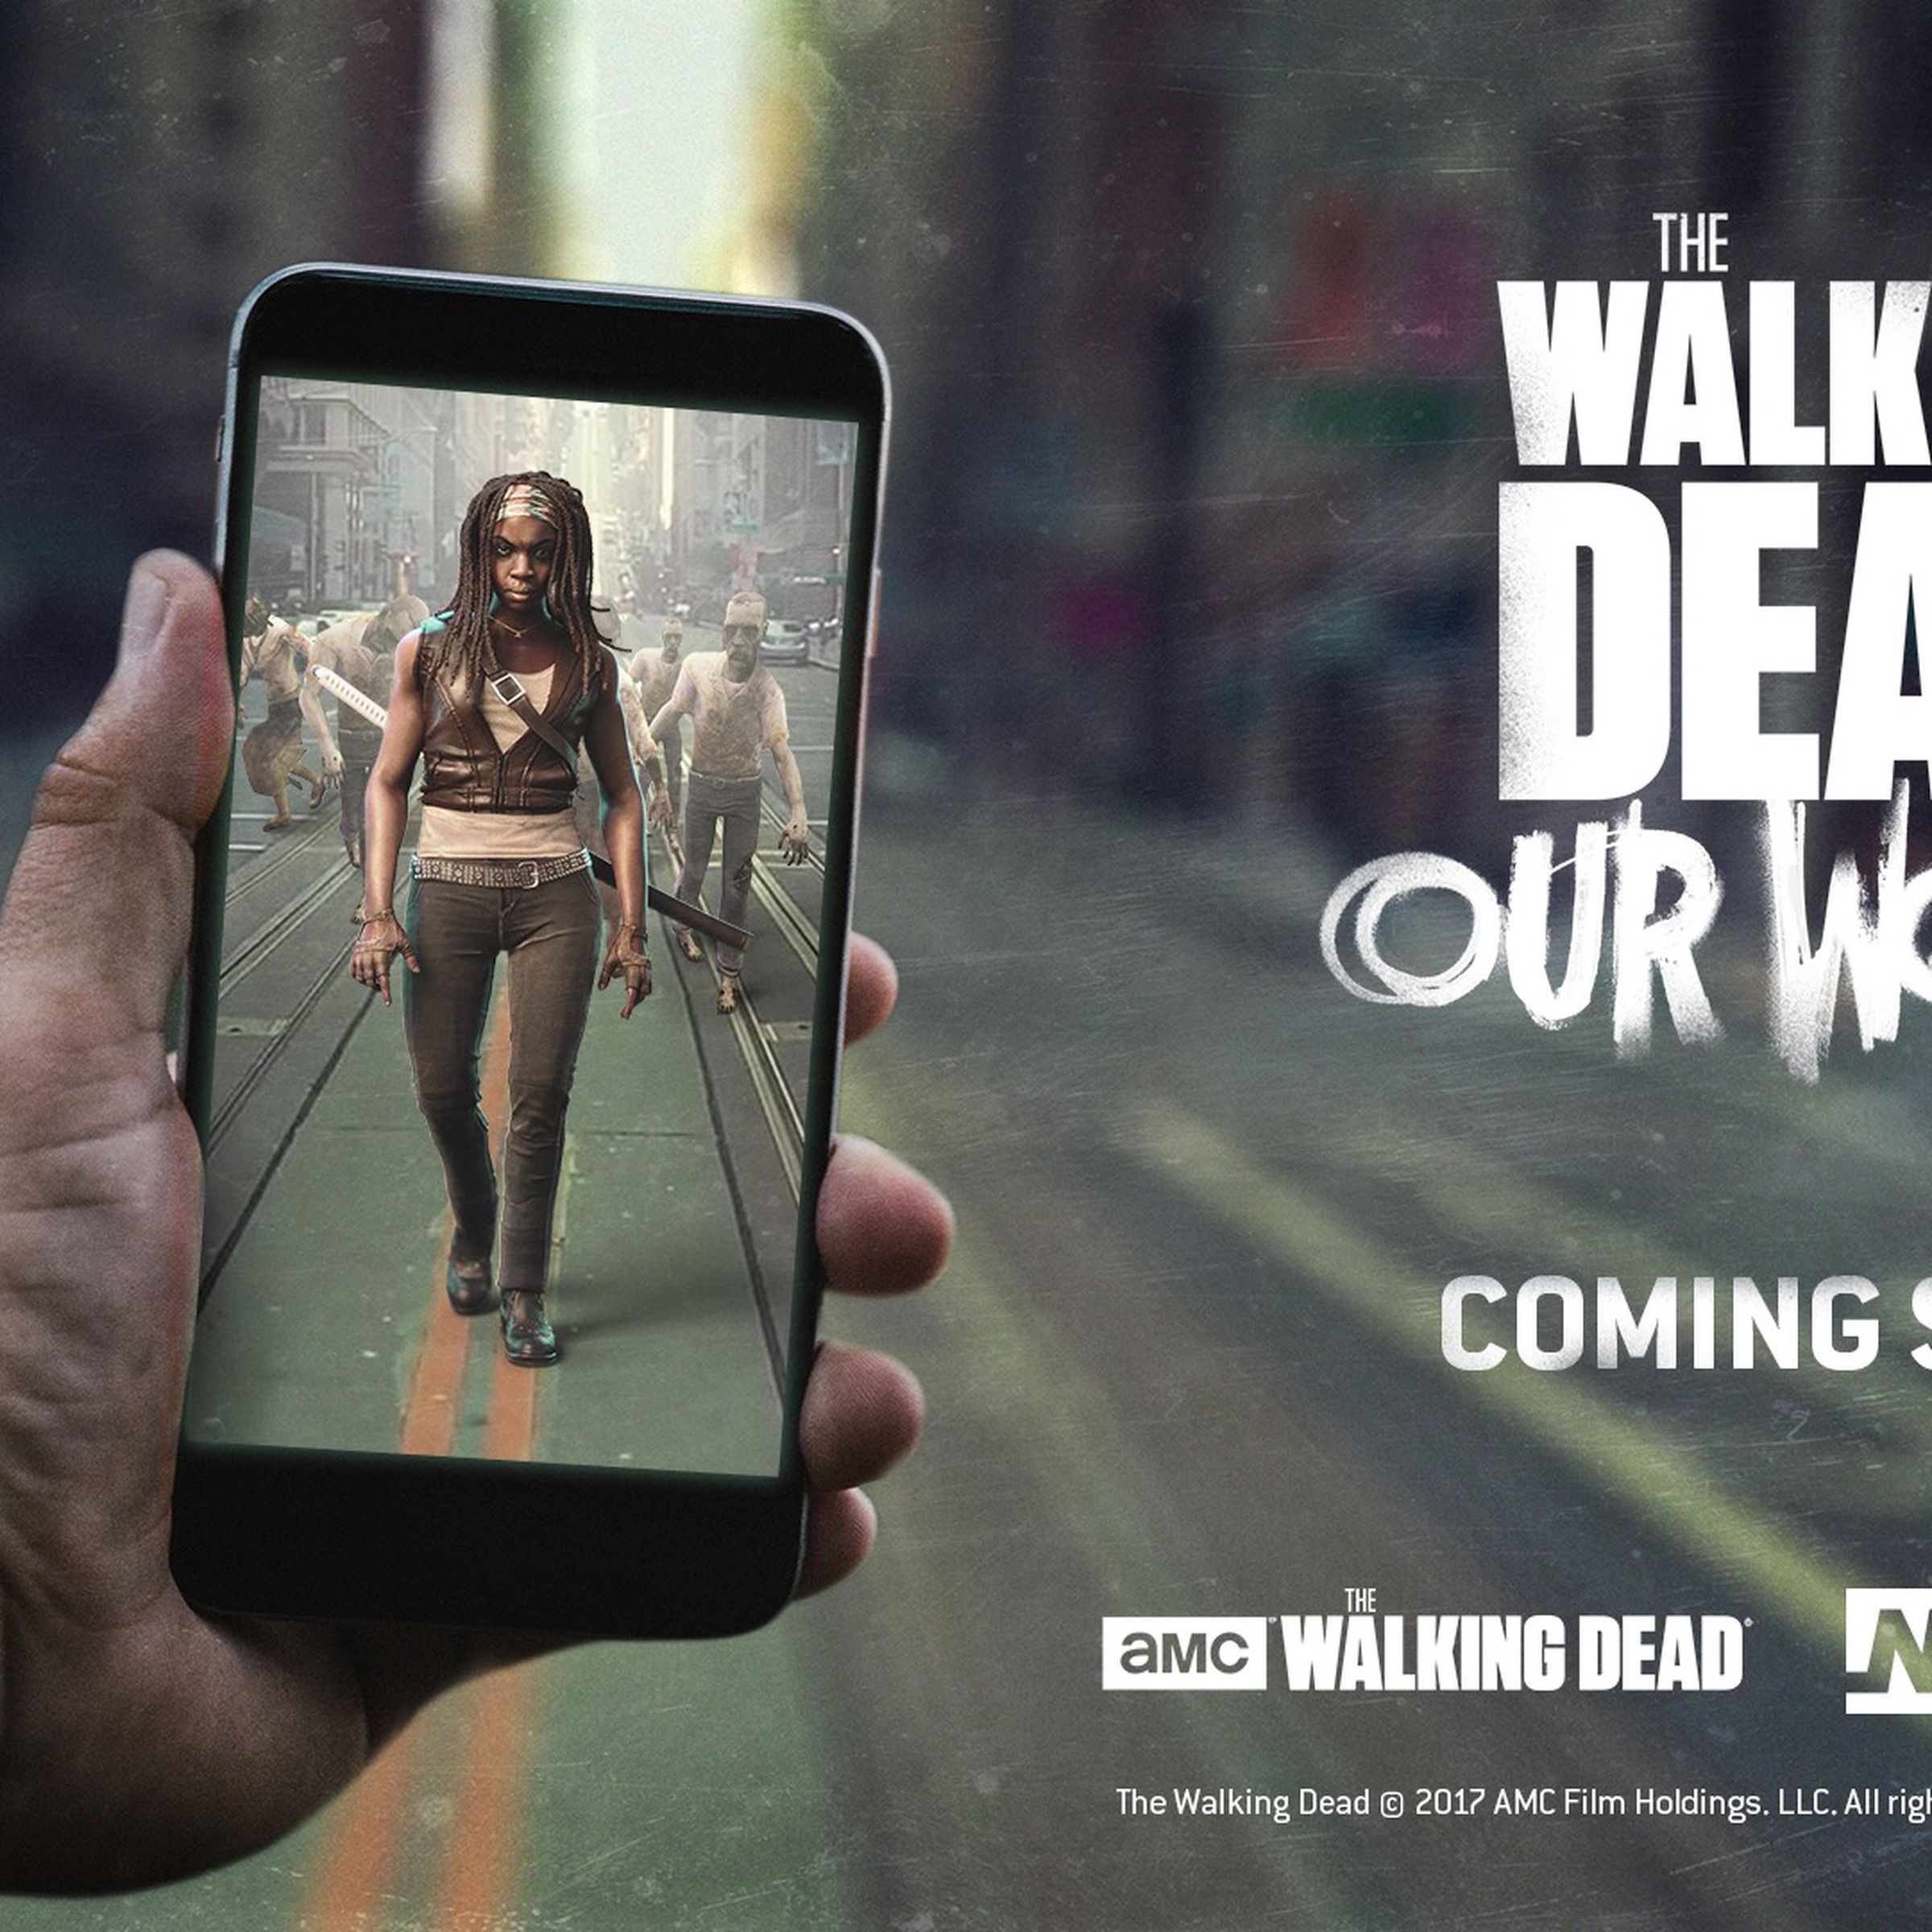 The Walking Dead: Our World